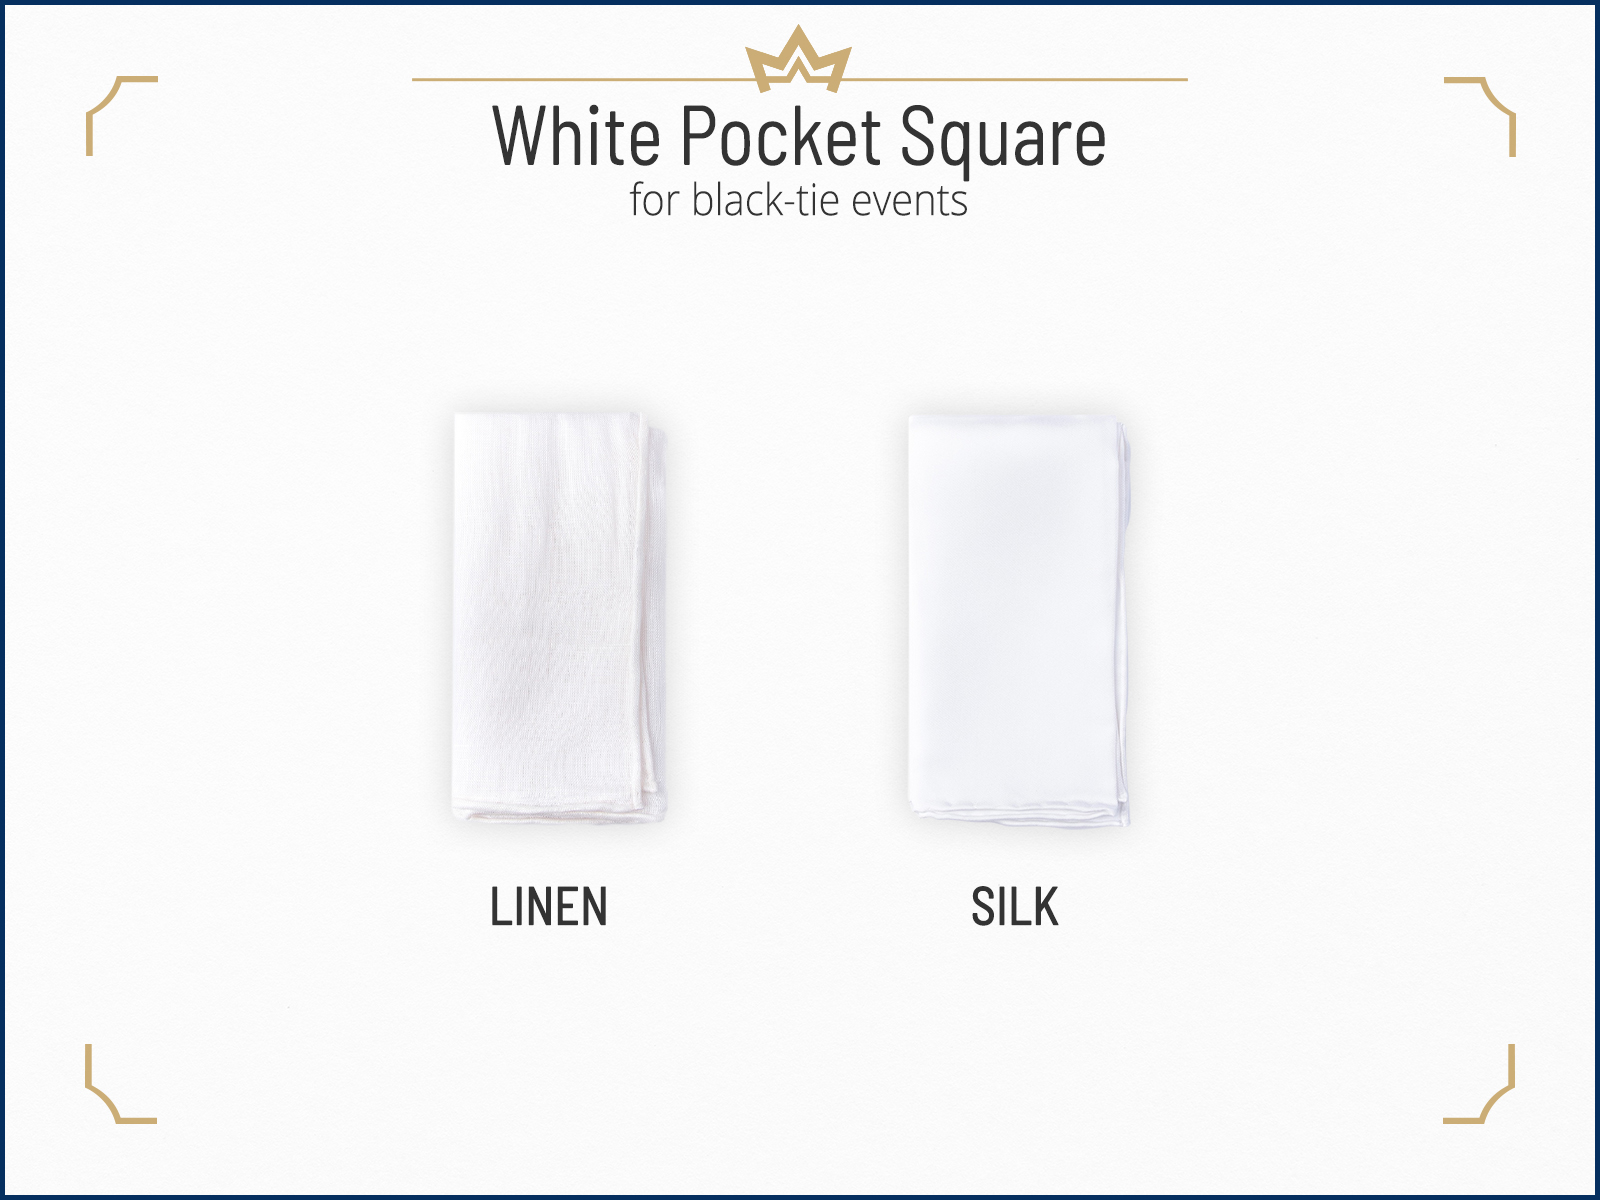 Wear a white pocket square for black-tie